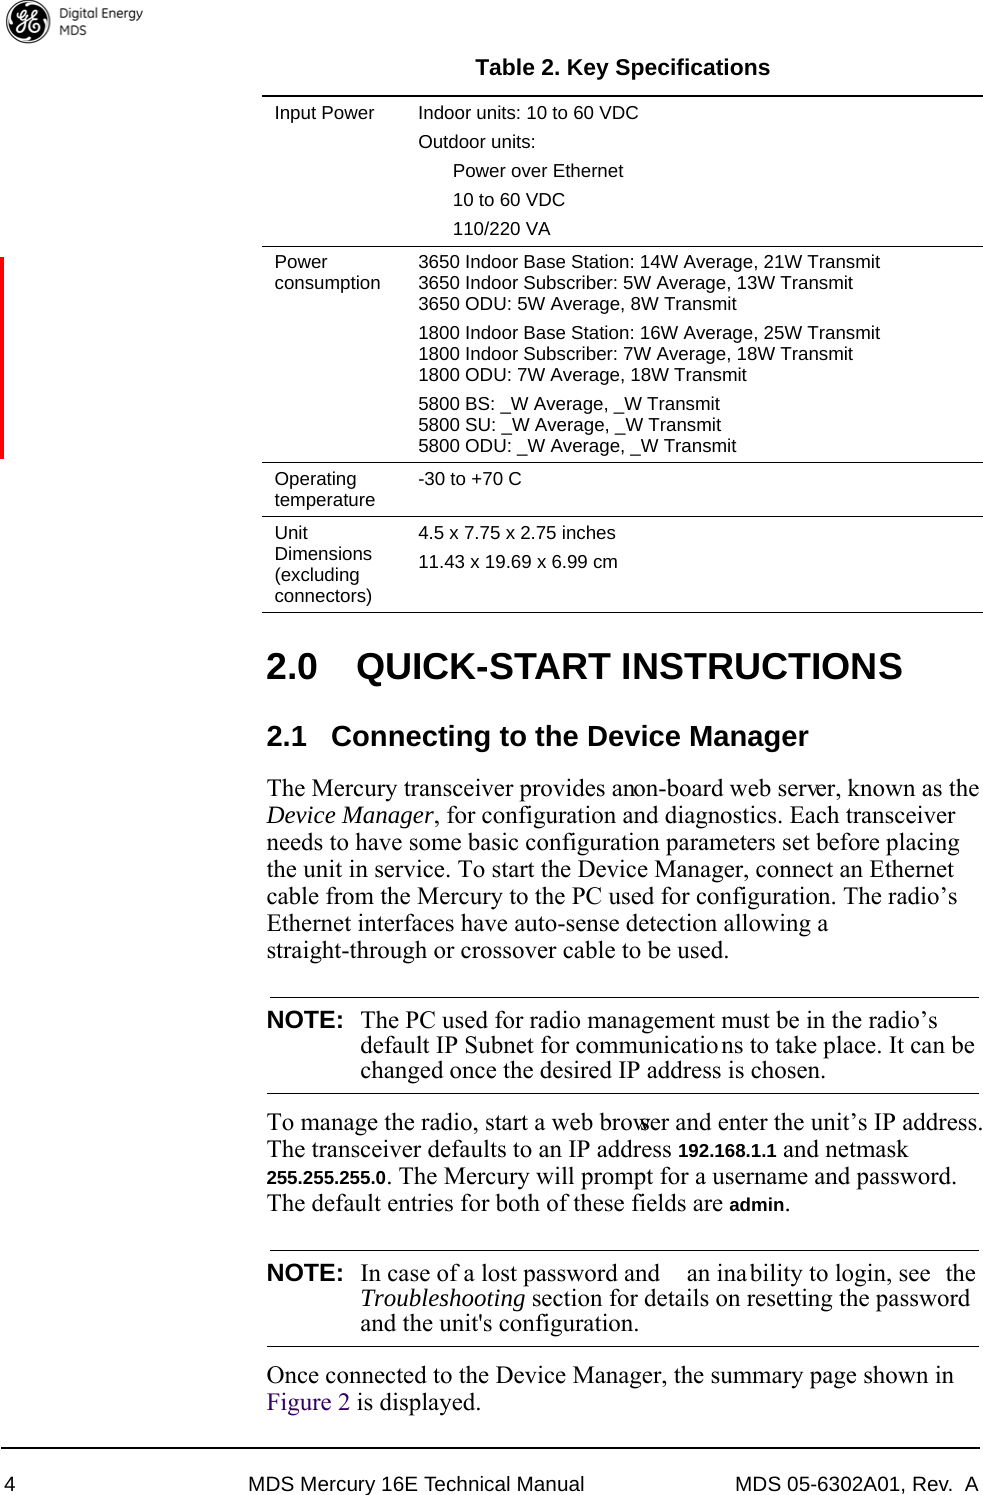 4 MDS Mercury 16E Technical Manual MDS 05-6302A01, Rev.  A2.0 QUICK-START INSTRUCTIONS2.1 Connecting to the Device ManagerThe Mercury transceiver provides an on-board web server, known as the Device Manager, for configuration and diagnostics. Each transceiver needs to have some basic configuration parameters set before placing the unit in service. To start the Device Manager, connect an Ethernet cable from the Mercury to the PC used for configuration. The radio’s Ethernet interfaces have auto-sense detection allowing a straight-through or crossover cable to be used. NOTE: The PC used for radio management must be in the radio’sdefault IP Subnet for communicatio ns to take place. It can bechanged once the desired IP address is chosen.To manage the radio, start a web browser and enter the unit’s IP address. The transceiver defaults to an IP address 192.168.1.1 and netmask 255.255.255.0. The Mercury will prompt for a username and password. The default entries for both of these fields are admin. NOTE: In case of a lost password and  an ina bility to login, see  theTroubleshooting section for details on resetting the passwordand the unit&apos;s configuration.Once connected to the Device Manager, the summary page shown in Figure 2 is displayed.Input Power  Indoor units: 10 to 60 VDCOutdoor units: Power over Ethernet10 to 60 VDC110/220 VAPower consumption 3650 Indoor Base Station: 14W Average, 21W Transmit3650 Indoor Subscriber: 5W Average, 13W Transmit3650 ODU: 5W Average, 8W Transmit1800 Indoor Base Station: 16W Average, 25W Transmit1800 Indoor Subscriber: 7W Average, 18W Transmit1800 ODU: 7W Average, 18W Transmit5800 BS: _W Average, _W Transmit5800 SU: _W Average, _W Transmit5800 ODU: _W Average, _W TransmitOperating temperature -30 to +70 CUnit Dimensions(excluding connectors)4.5 x 7.75 x 2.75 inches11.43 x 19.69 x 6.99 cmTable 2. Key Specifications